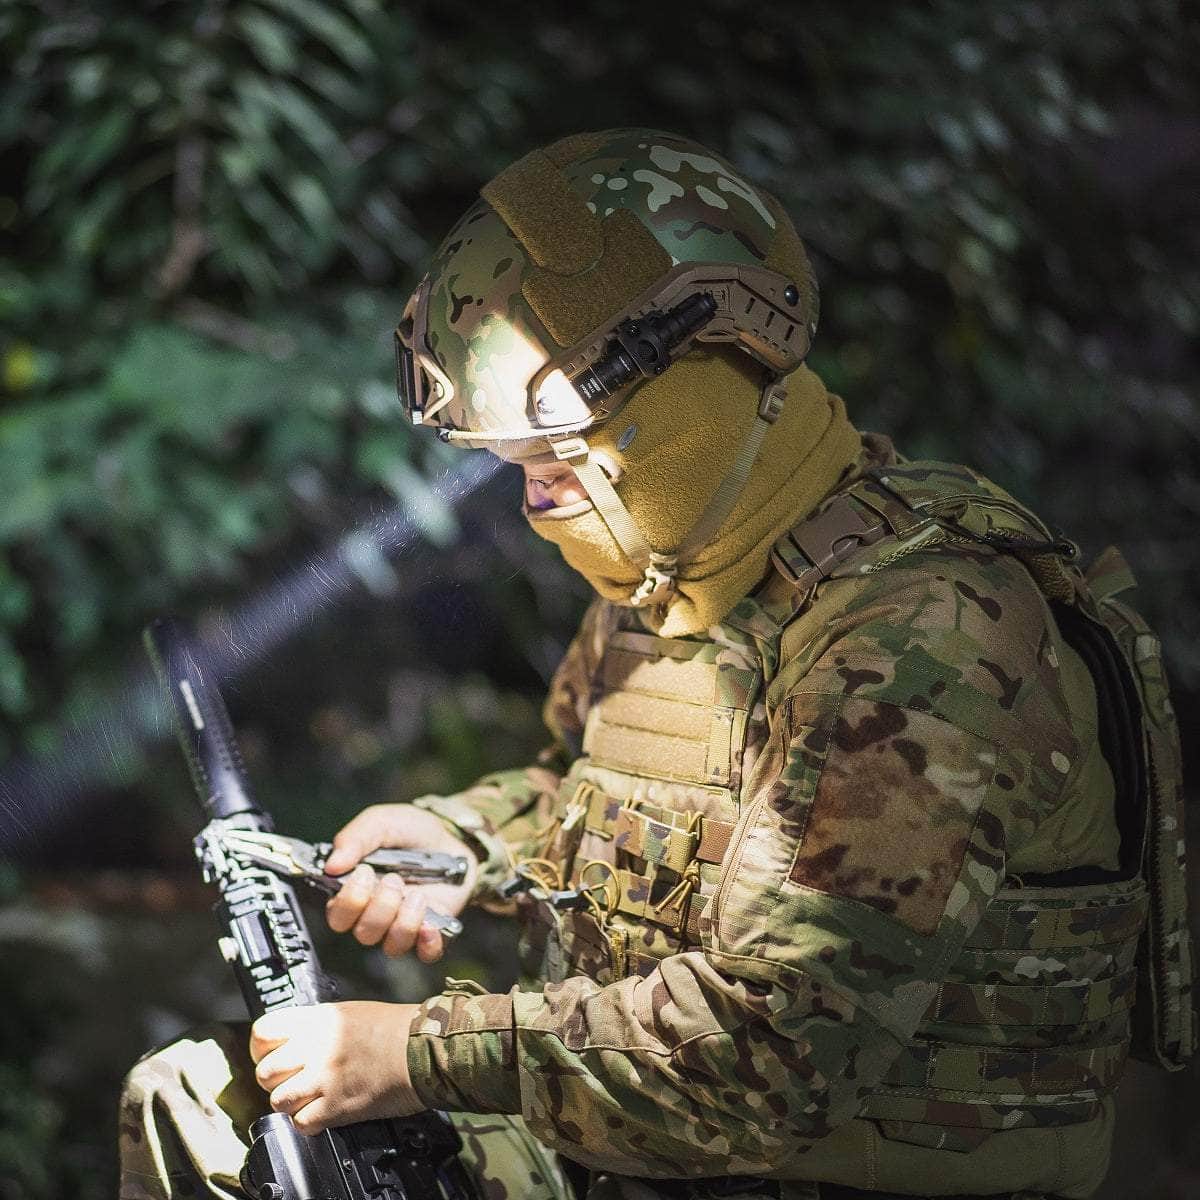 Soldier in camouflage gear inspecting a rifle, wearing a helmet with a mounted Weltool T1 Pro TAC mini tactical flashlight, surrounded by lush greenery with the Weltool T1 Pro TAC